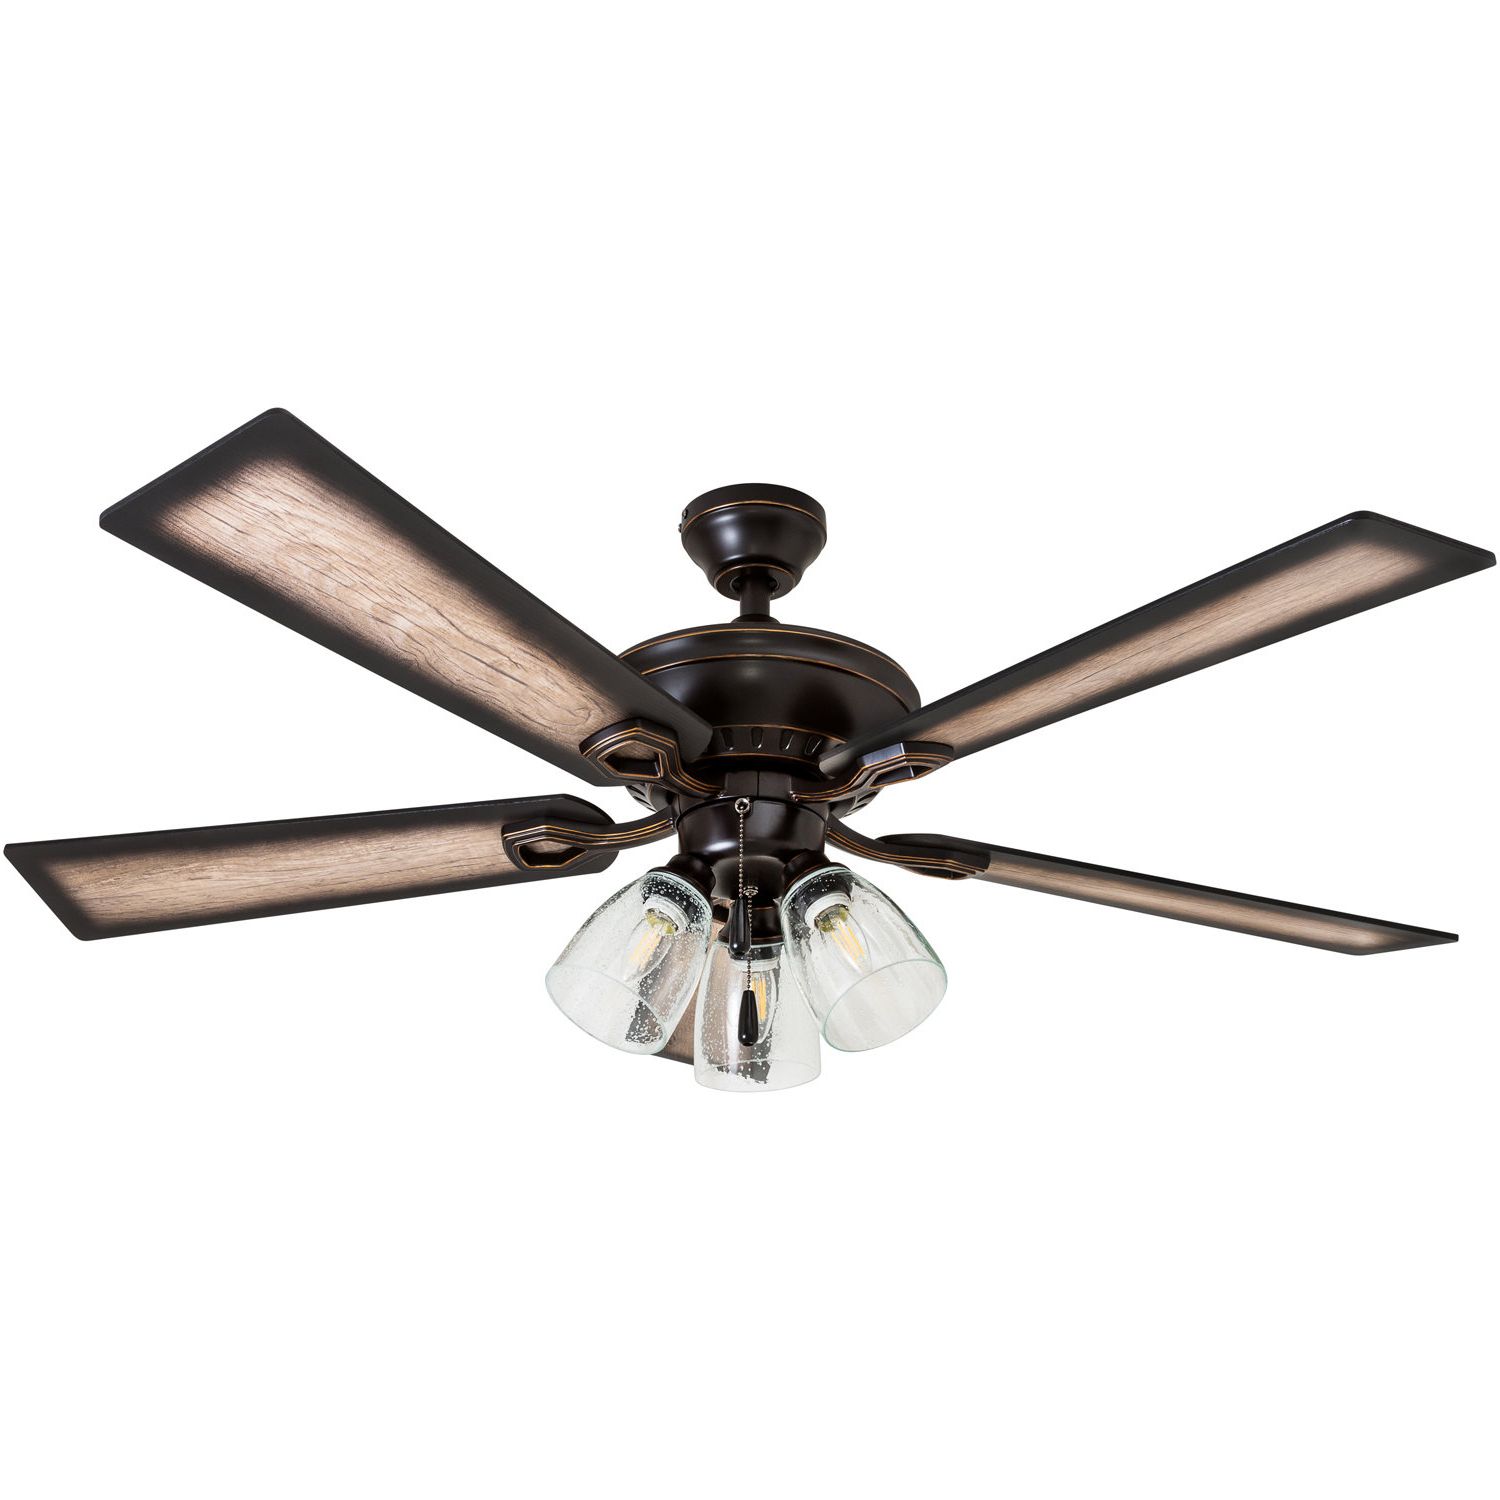 Well Liked Crestfield 5 Blade Led Ceiling Fans Inside 52" O'hanlon 5 Blade Led Ceiling Fan, Light Kit Included (View 9 of 20)